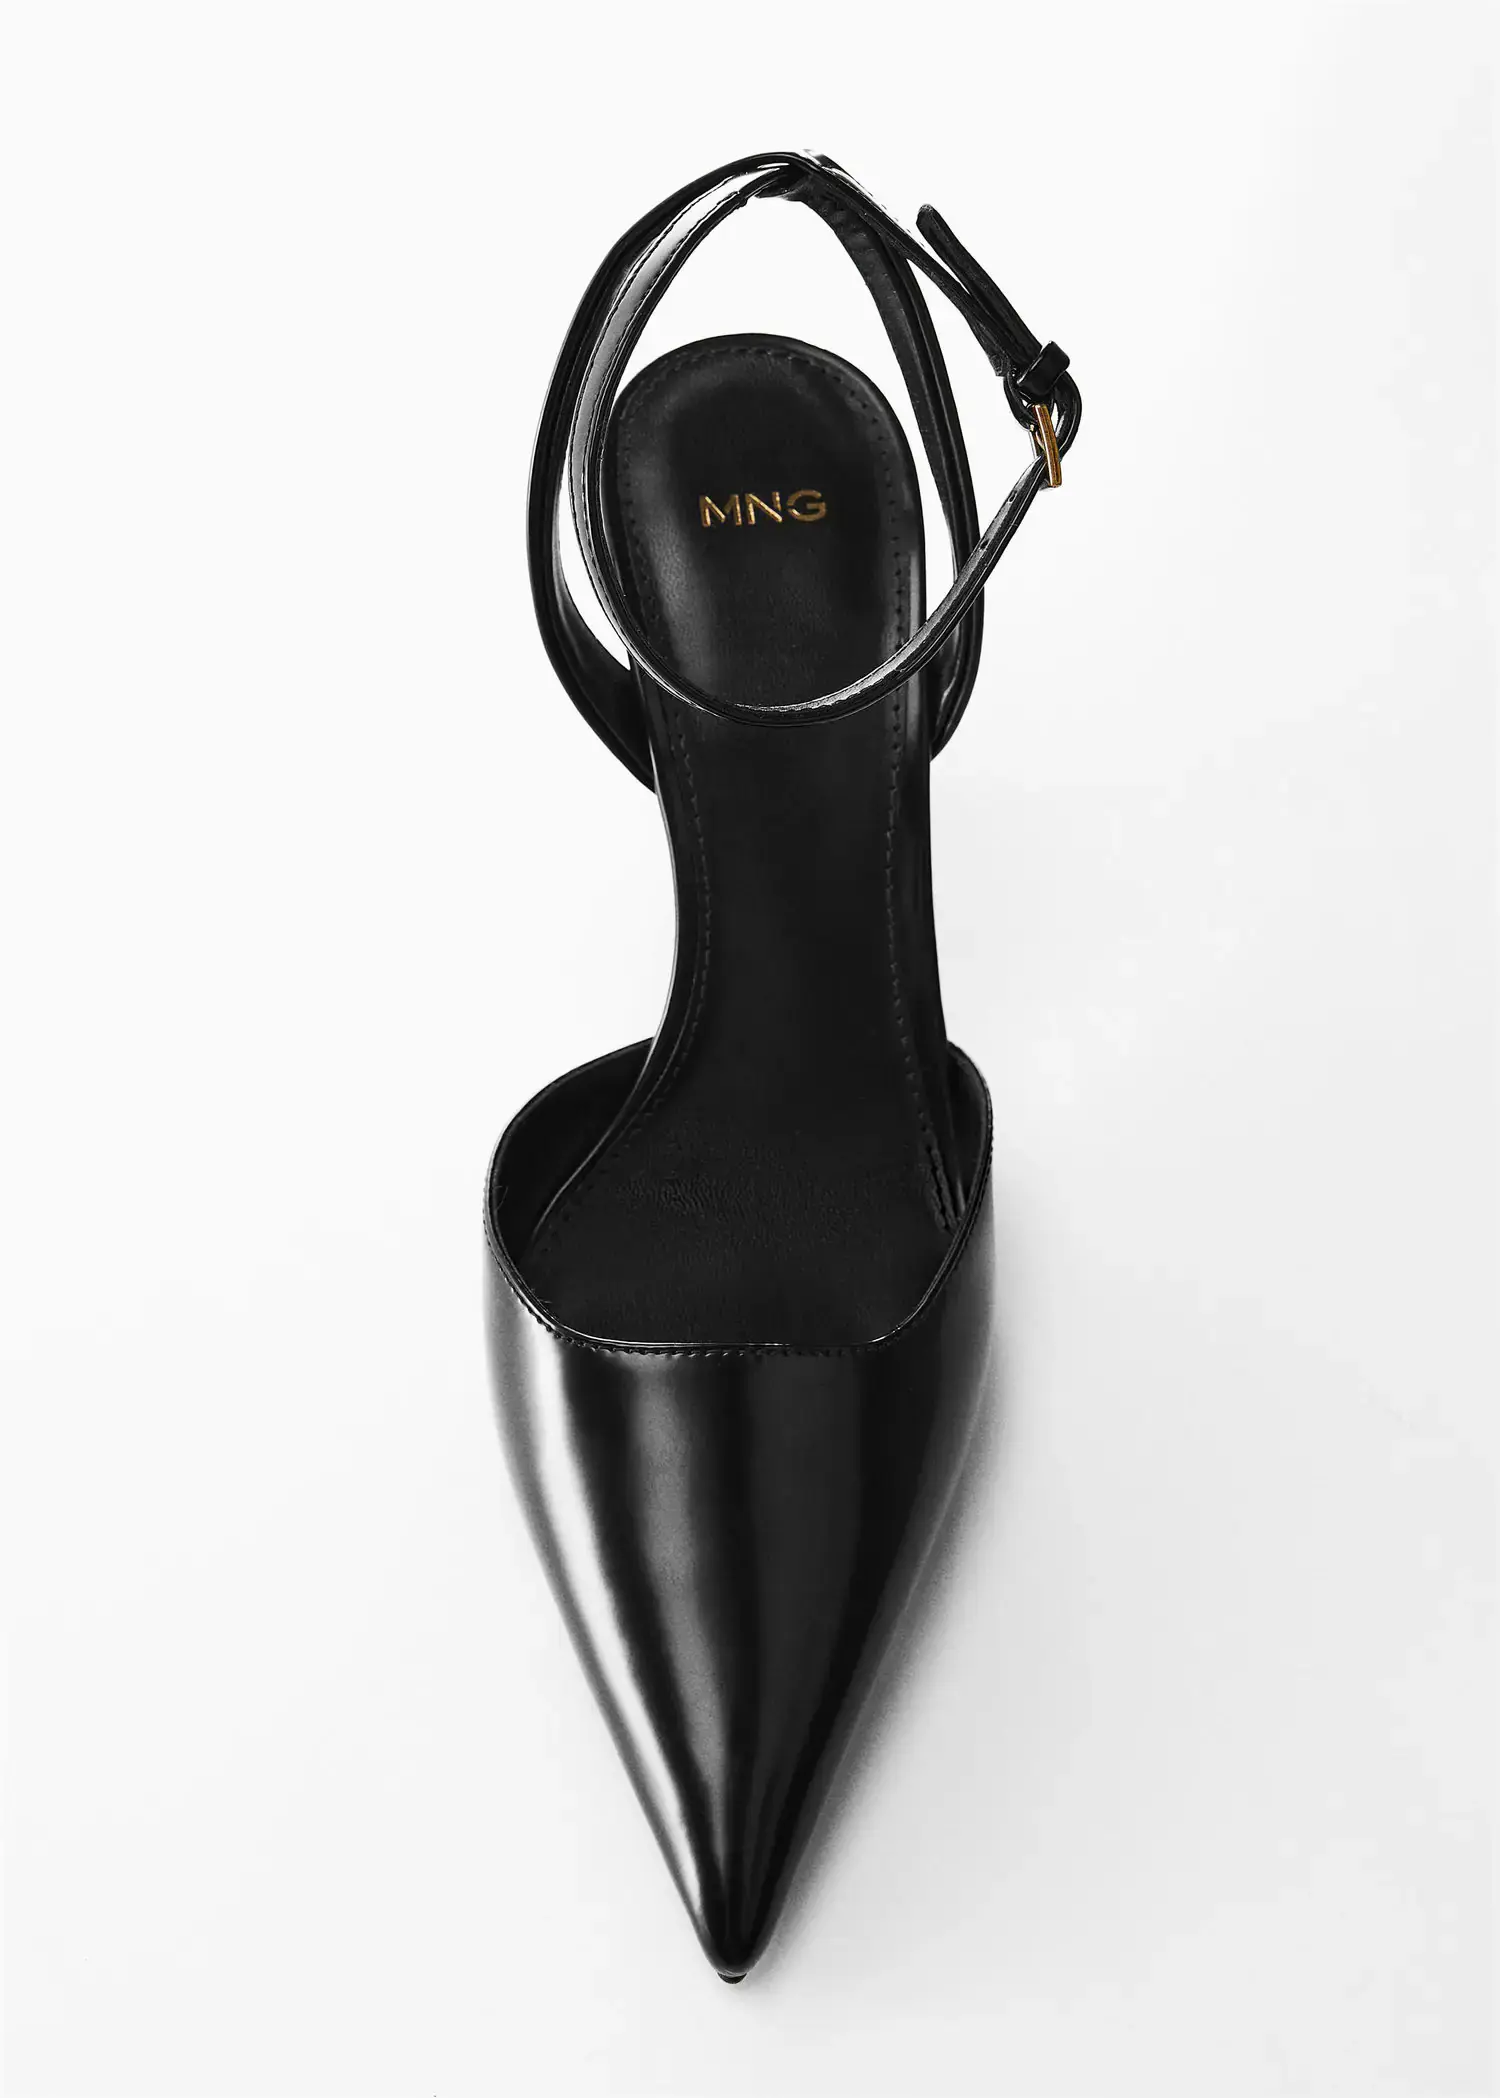 Mango High-heeled shoes. a pair of black high heels on a white surface. 